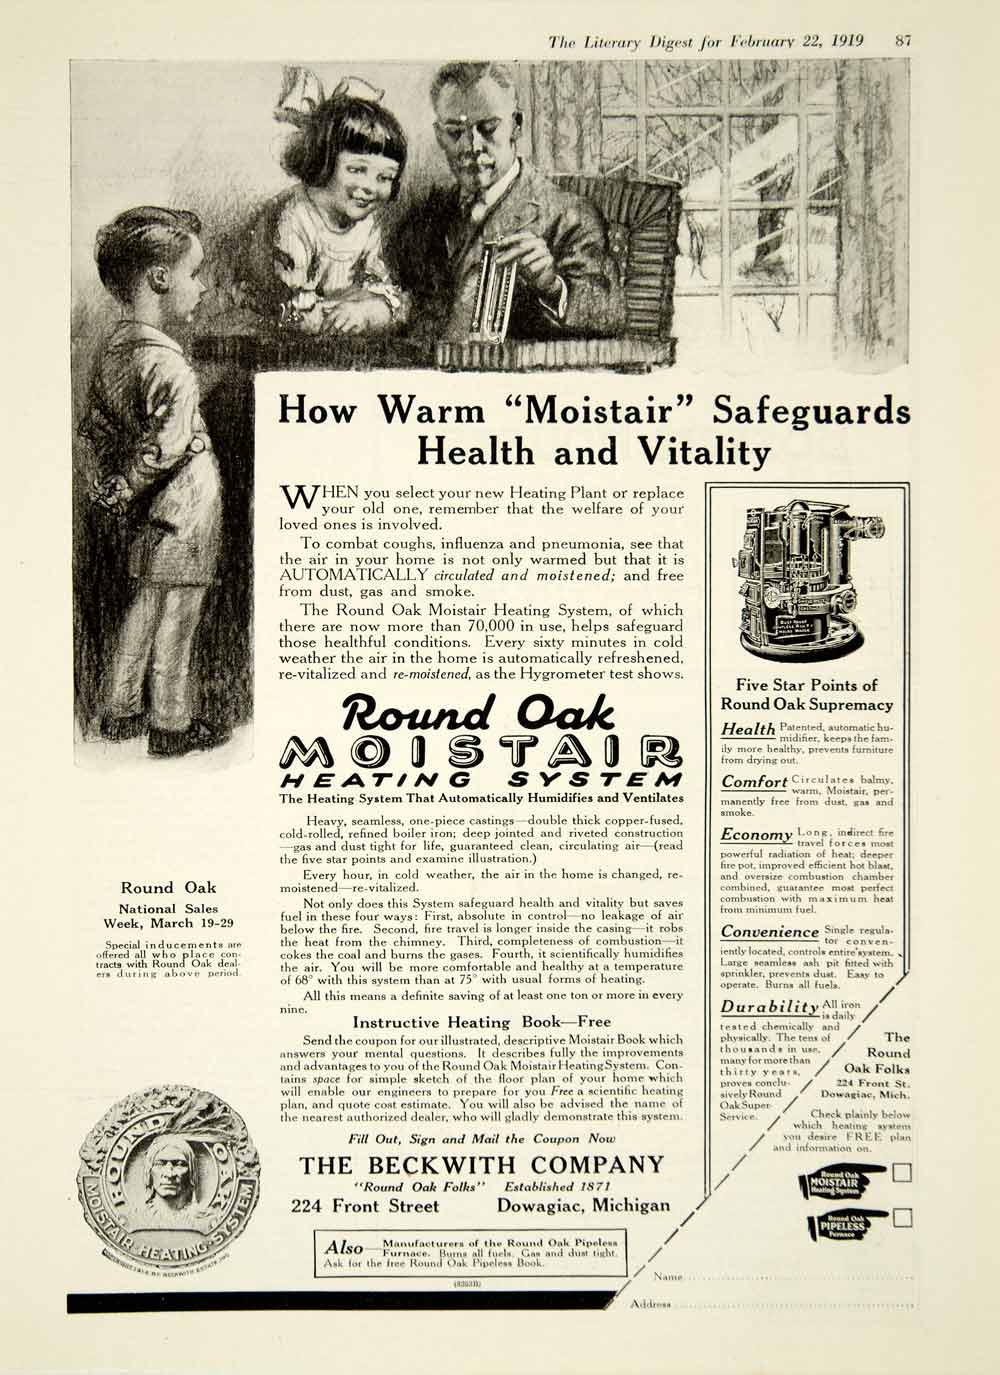 1919 Ad Beckwith 224 Front St Dowagiac MI Round Oak Moistair Heating System YLD2